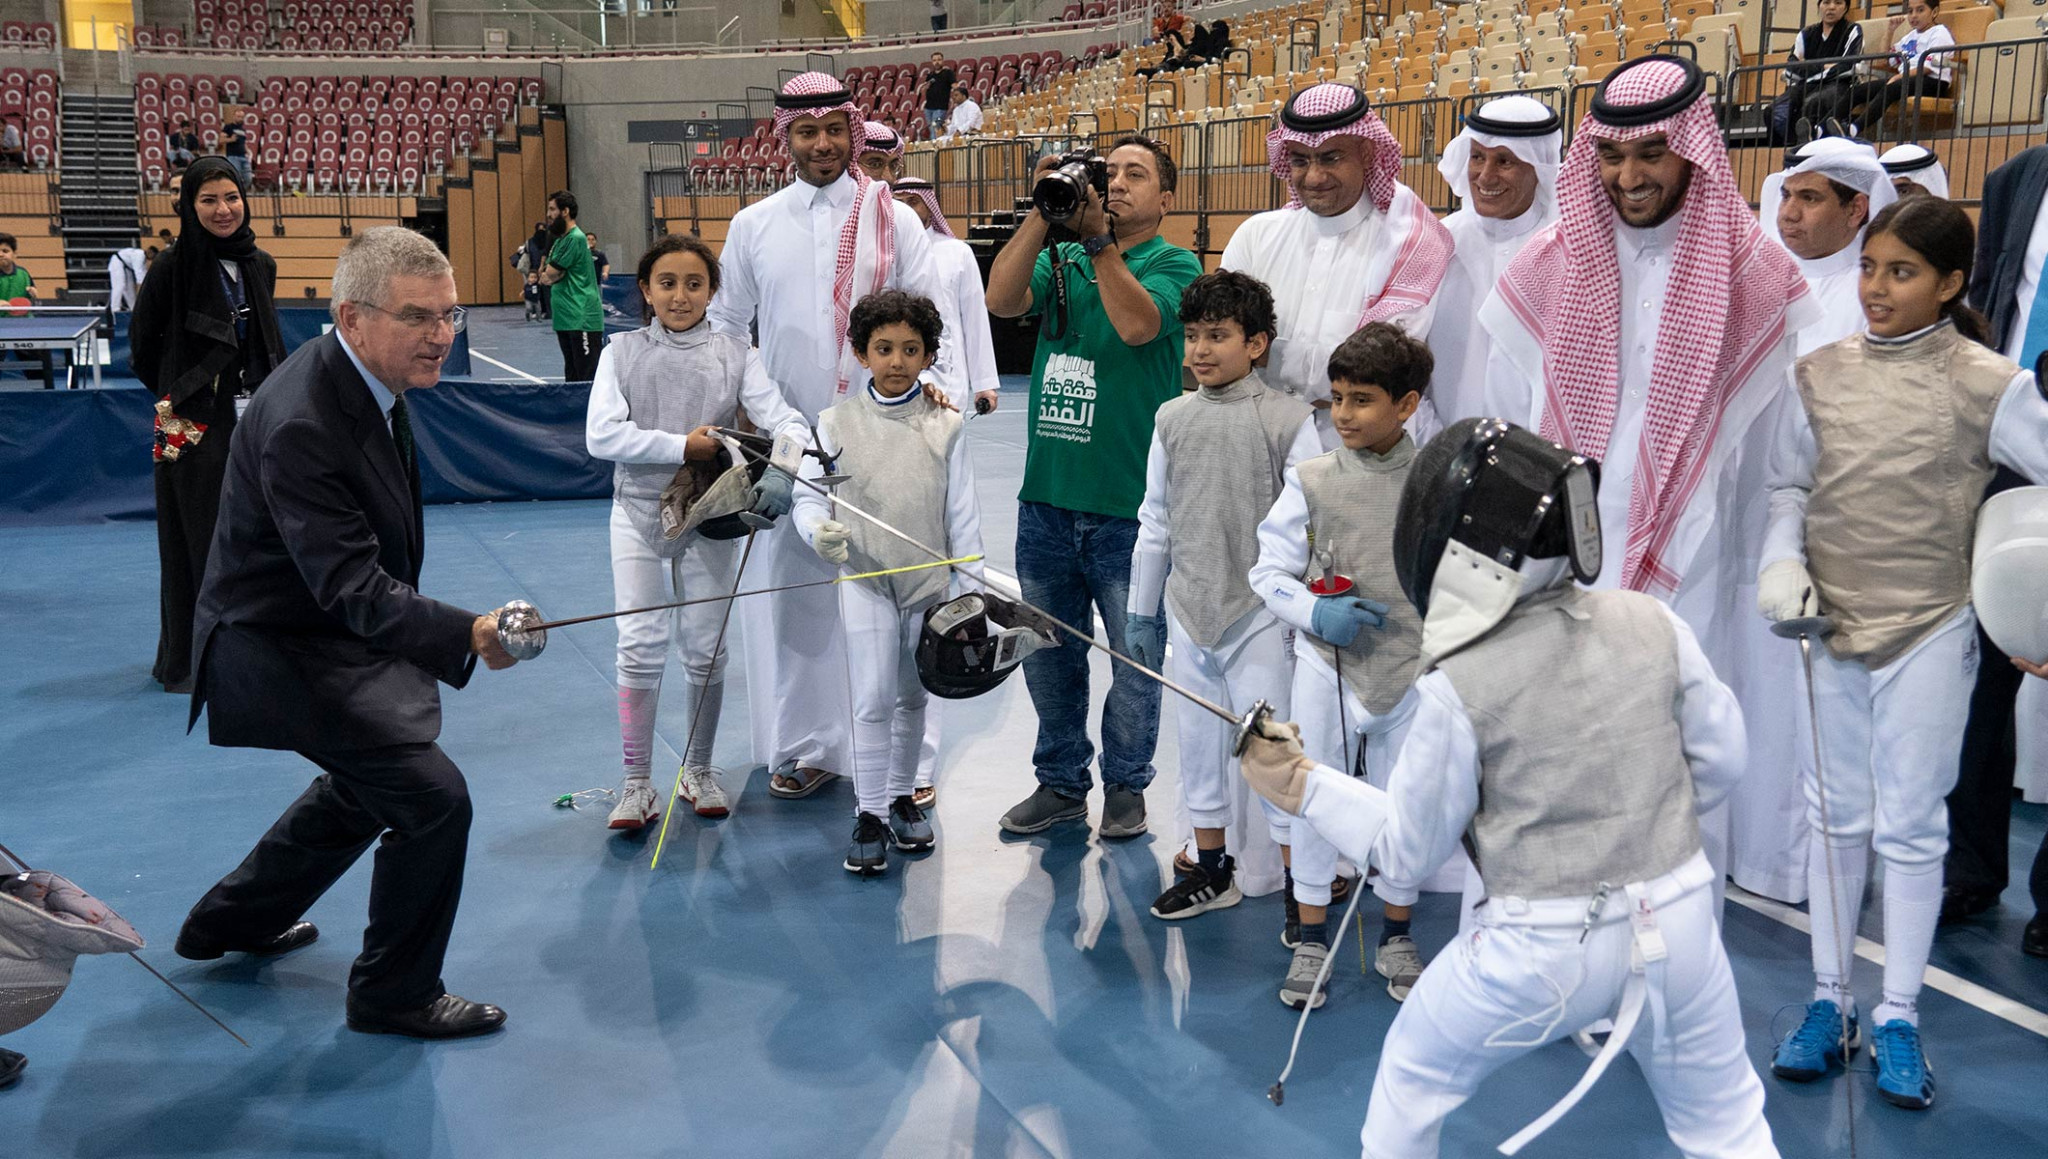 Saudi Arabia promise Bach more opportunities for female athletes 